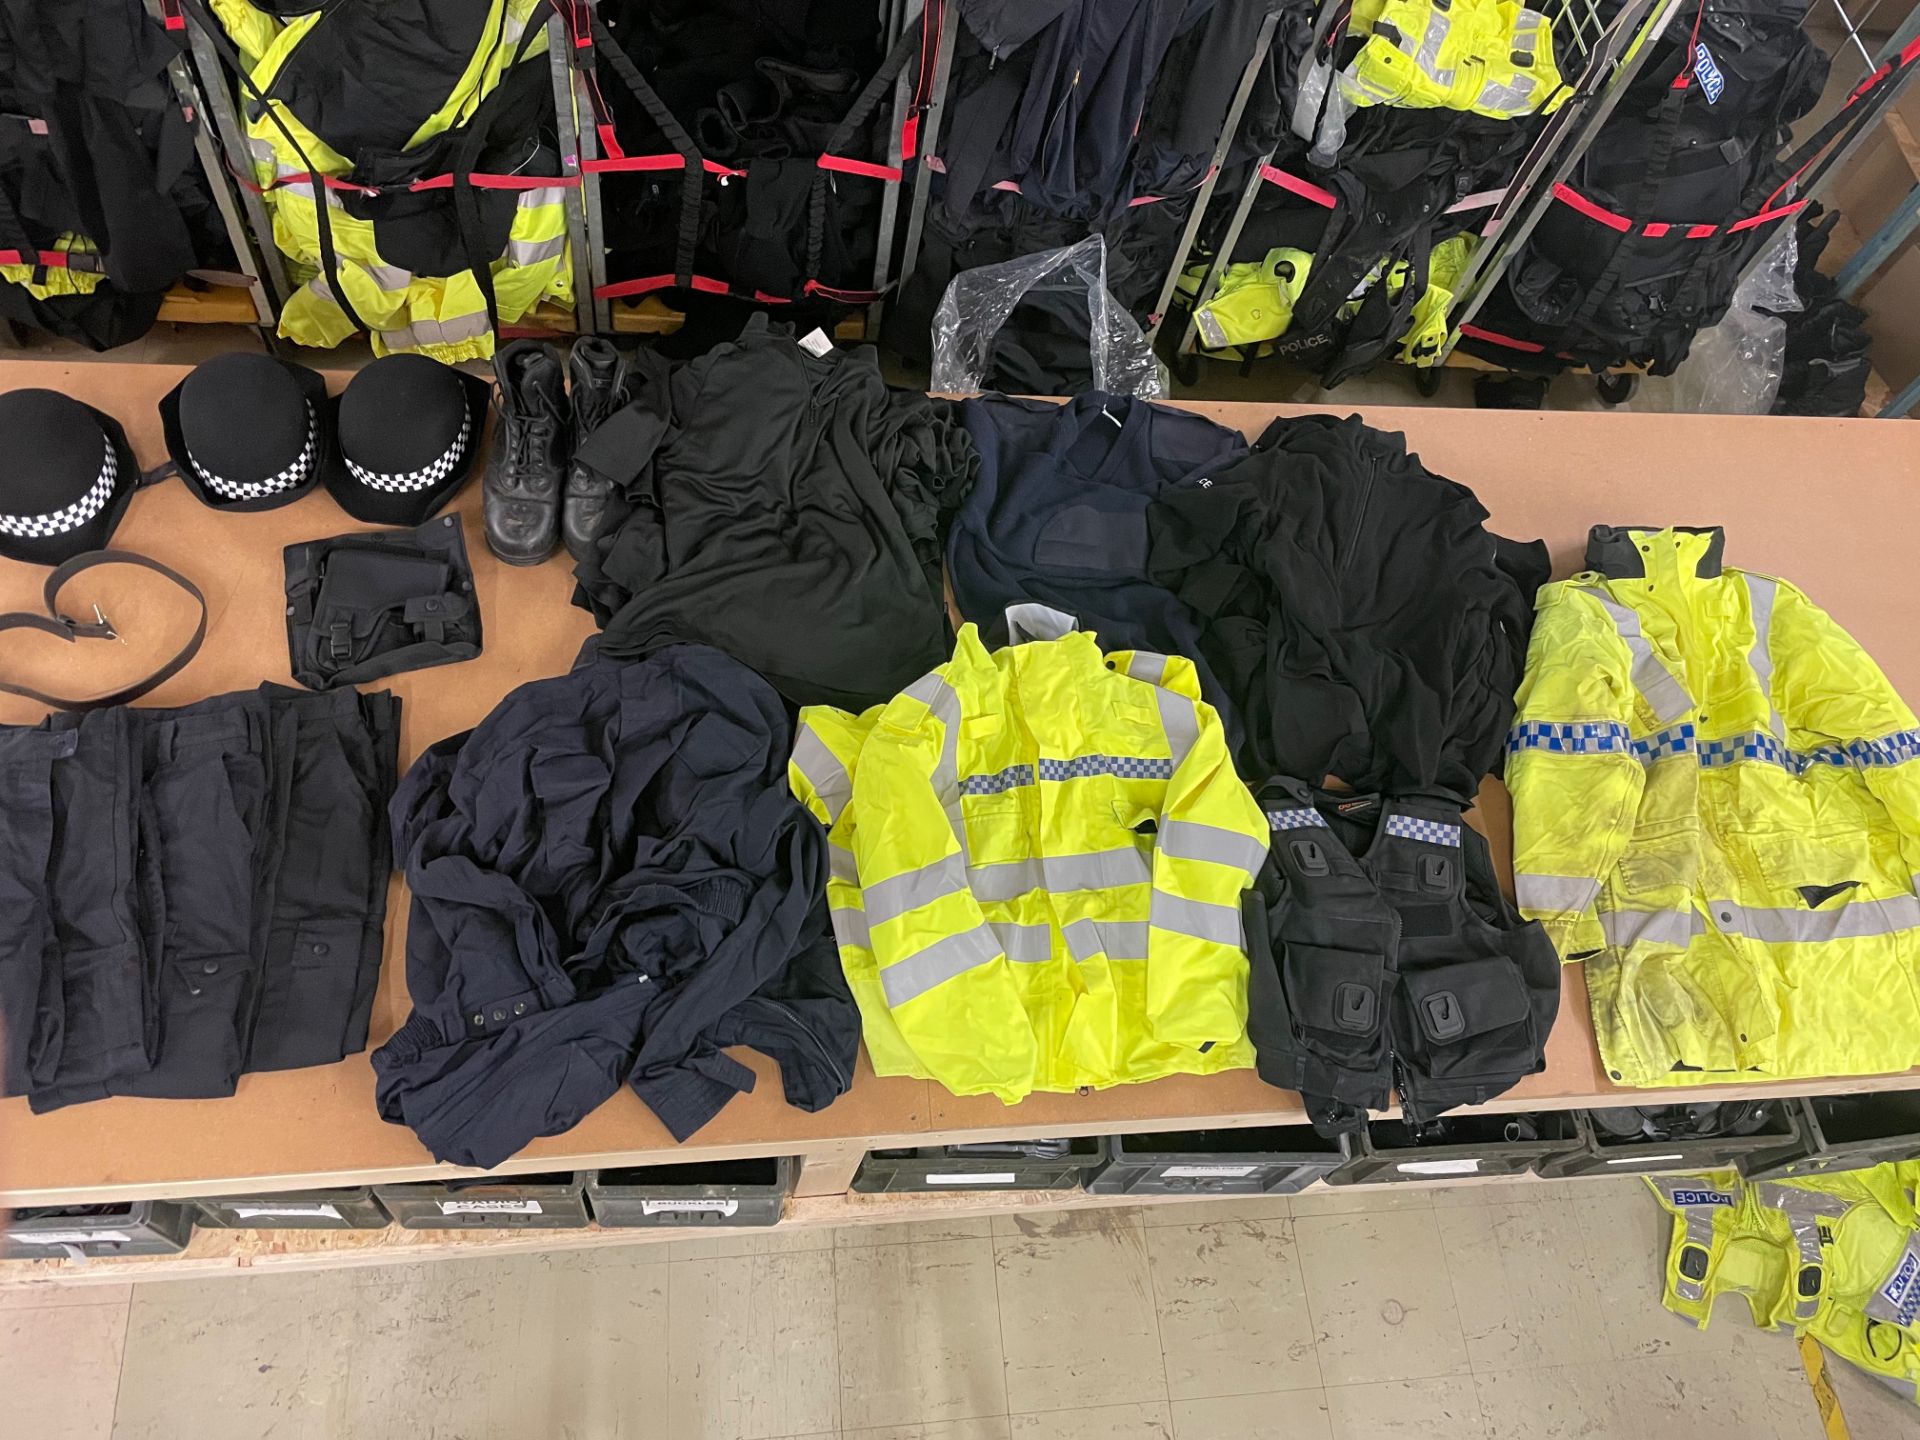 20 X BAGS EX POLICE CLOTHING & ACCESSORIES - RRP £5500.00 - Image 5 of 12